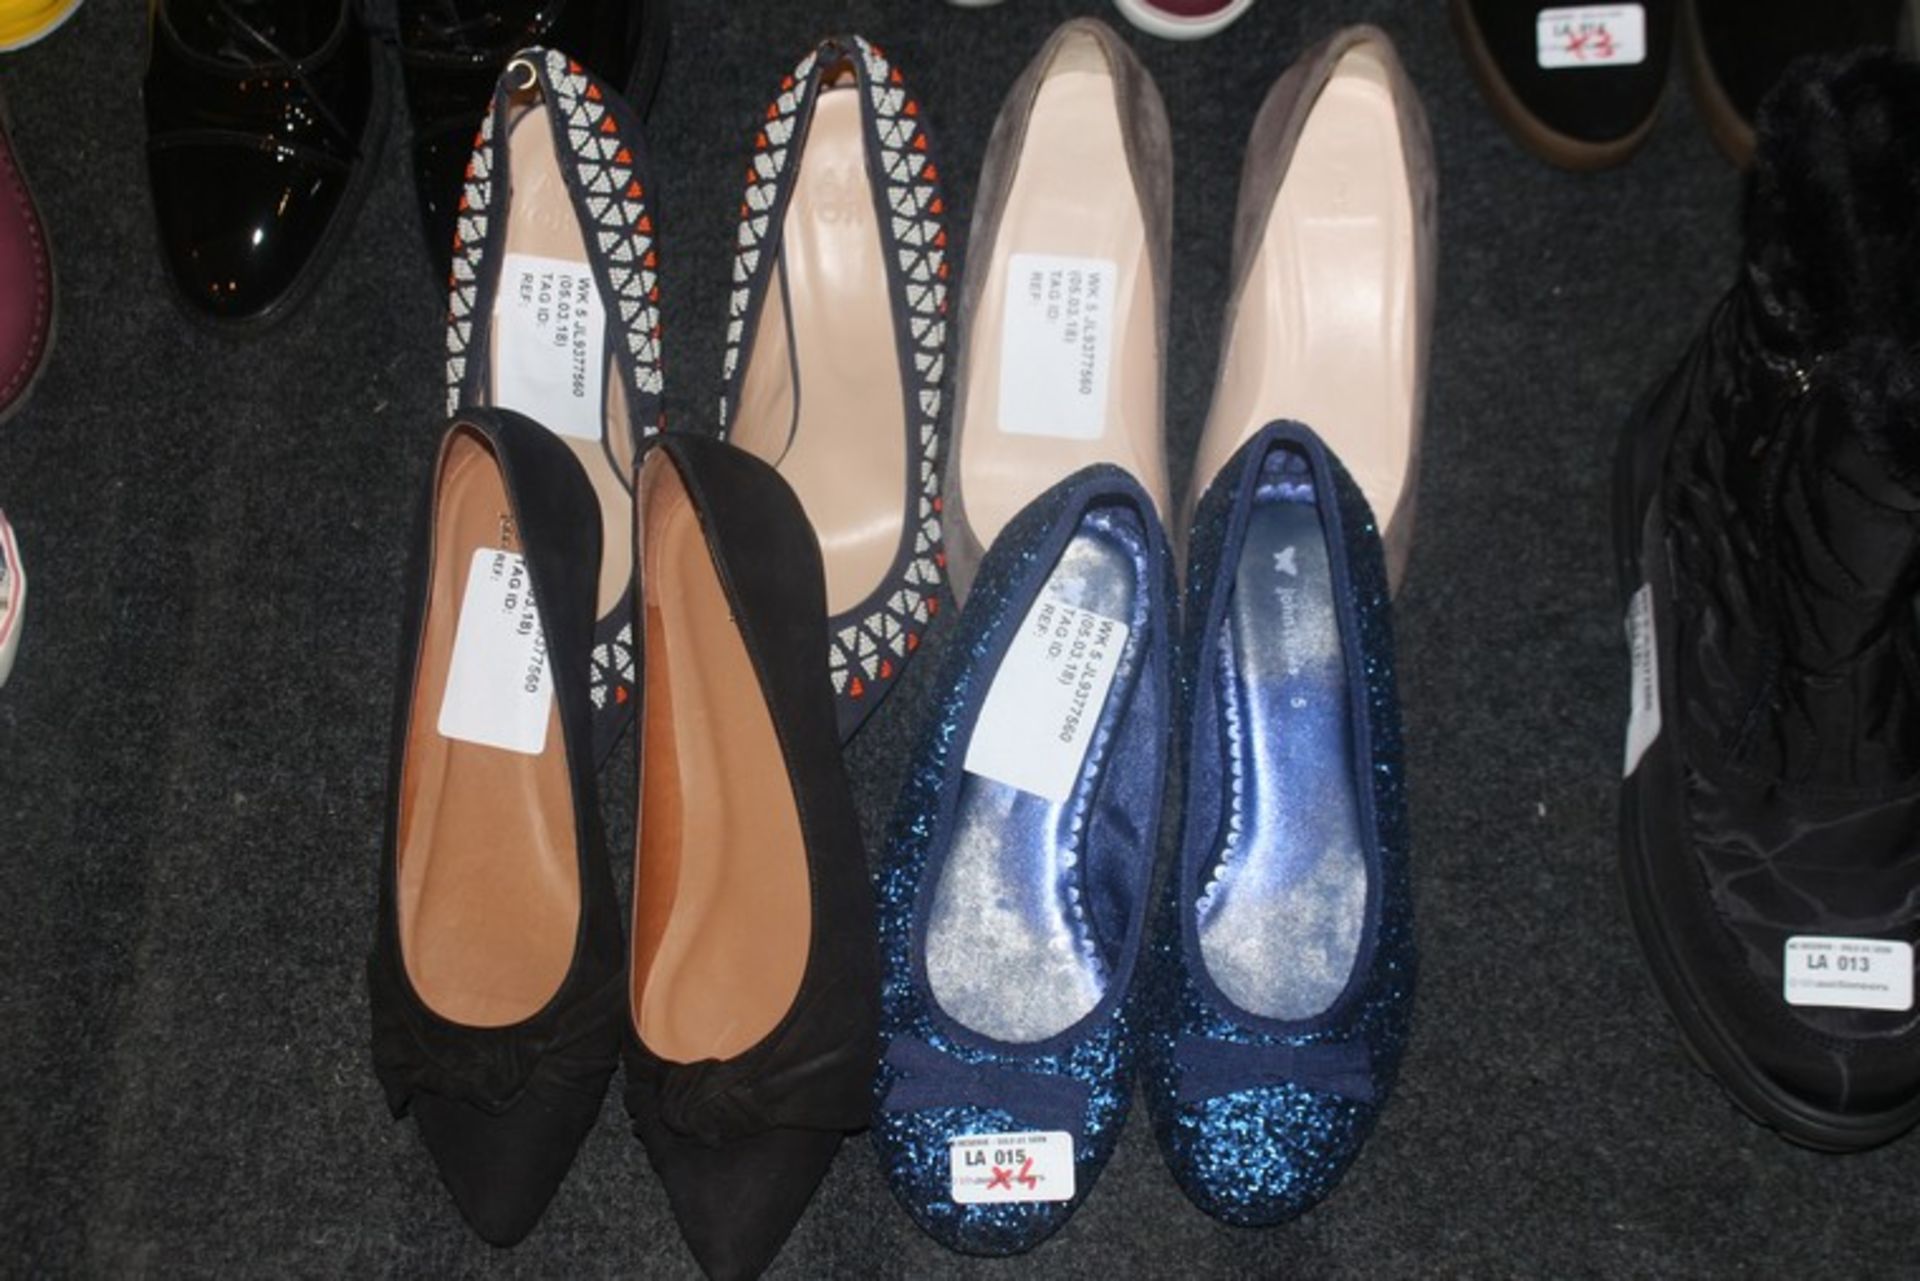 4 x ASSORTED PAIRS OF WOMEN'S FOOTWEAR (05.03.18) *PLEASE NOTE THAT THE BID PRICE IS MULTIPLIED BY